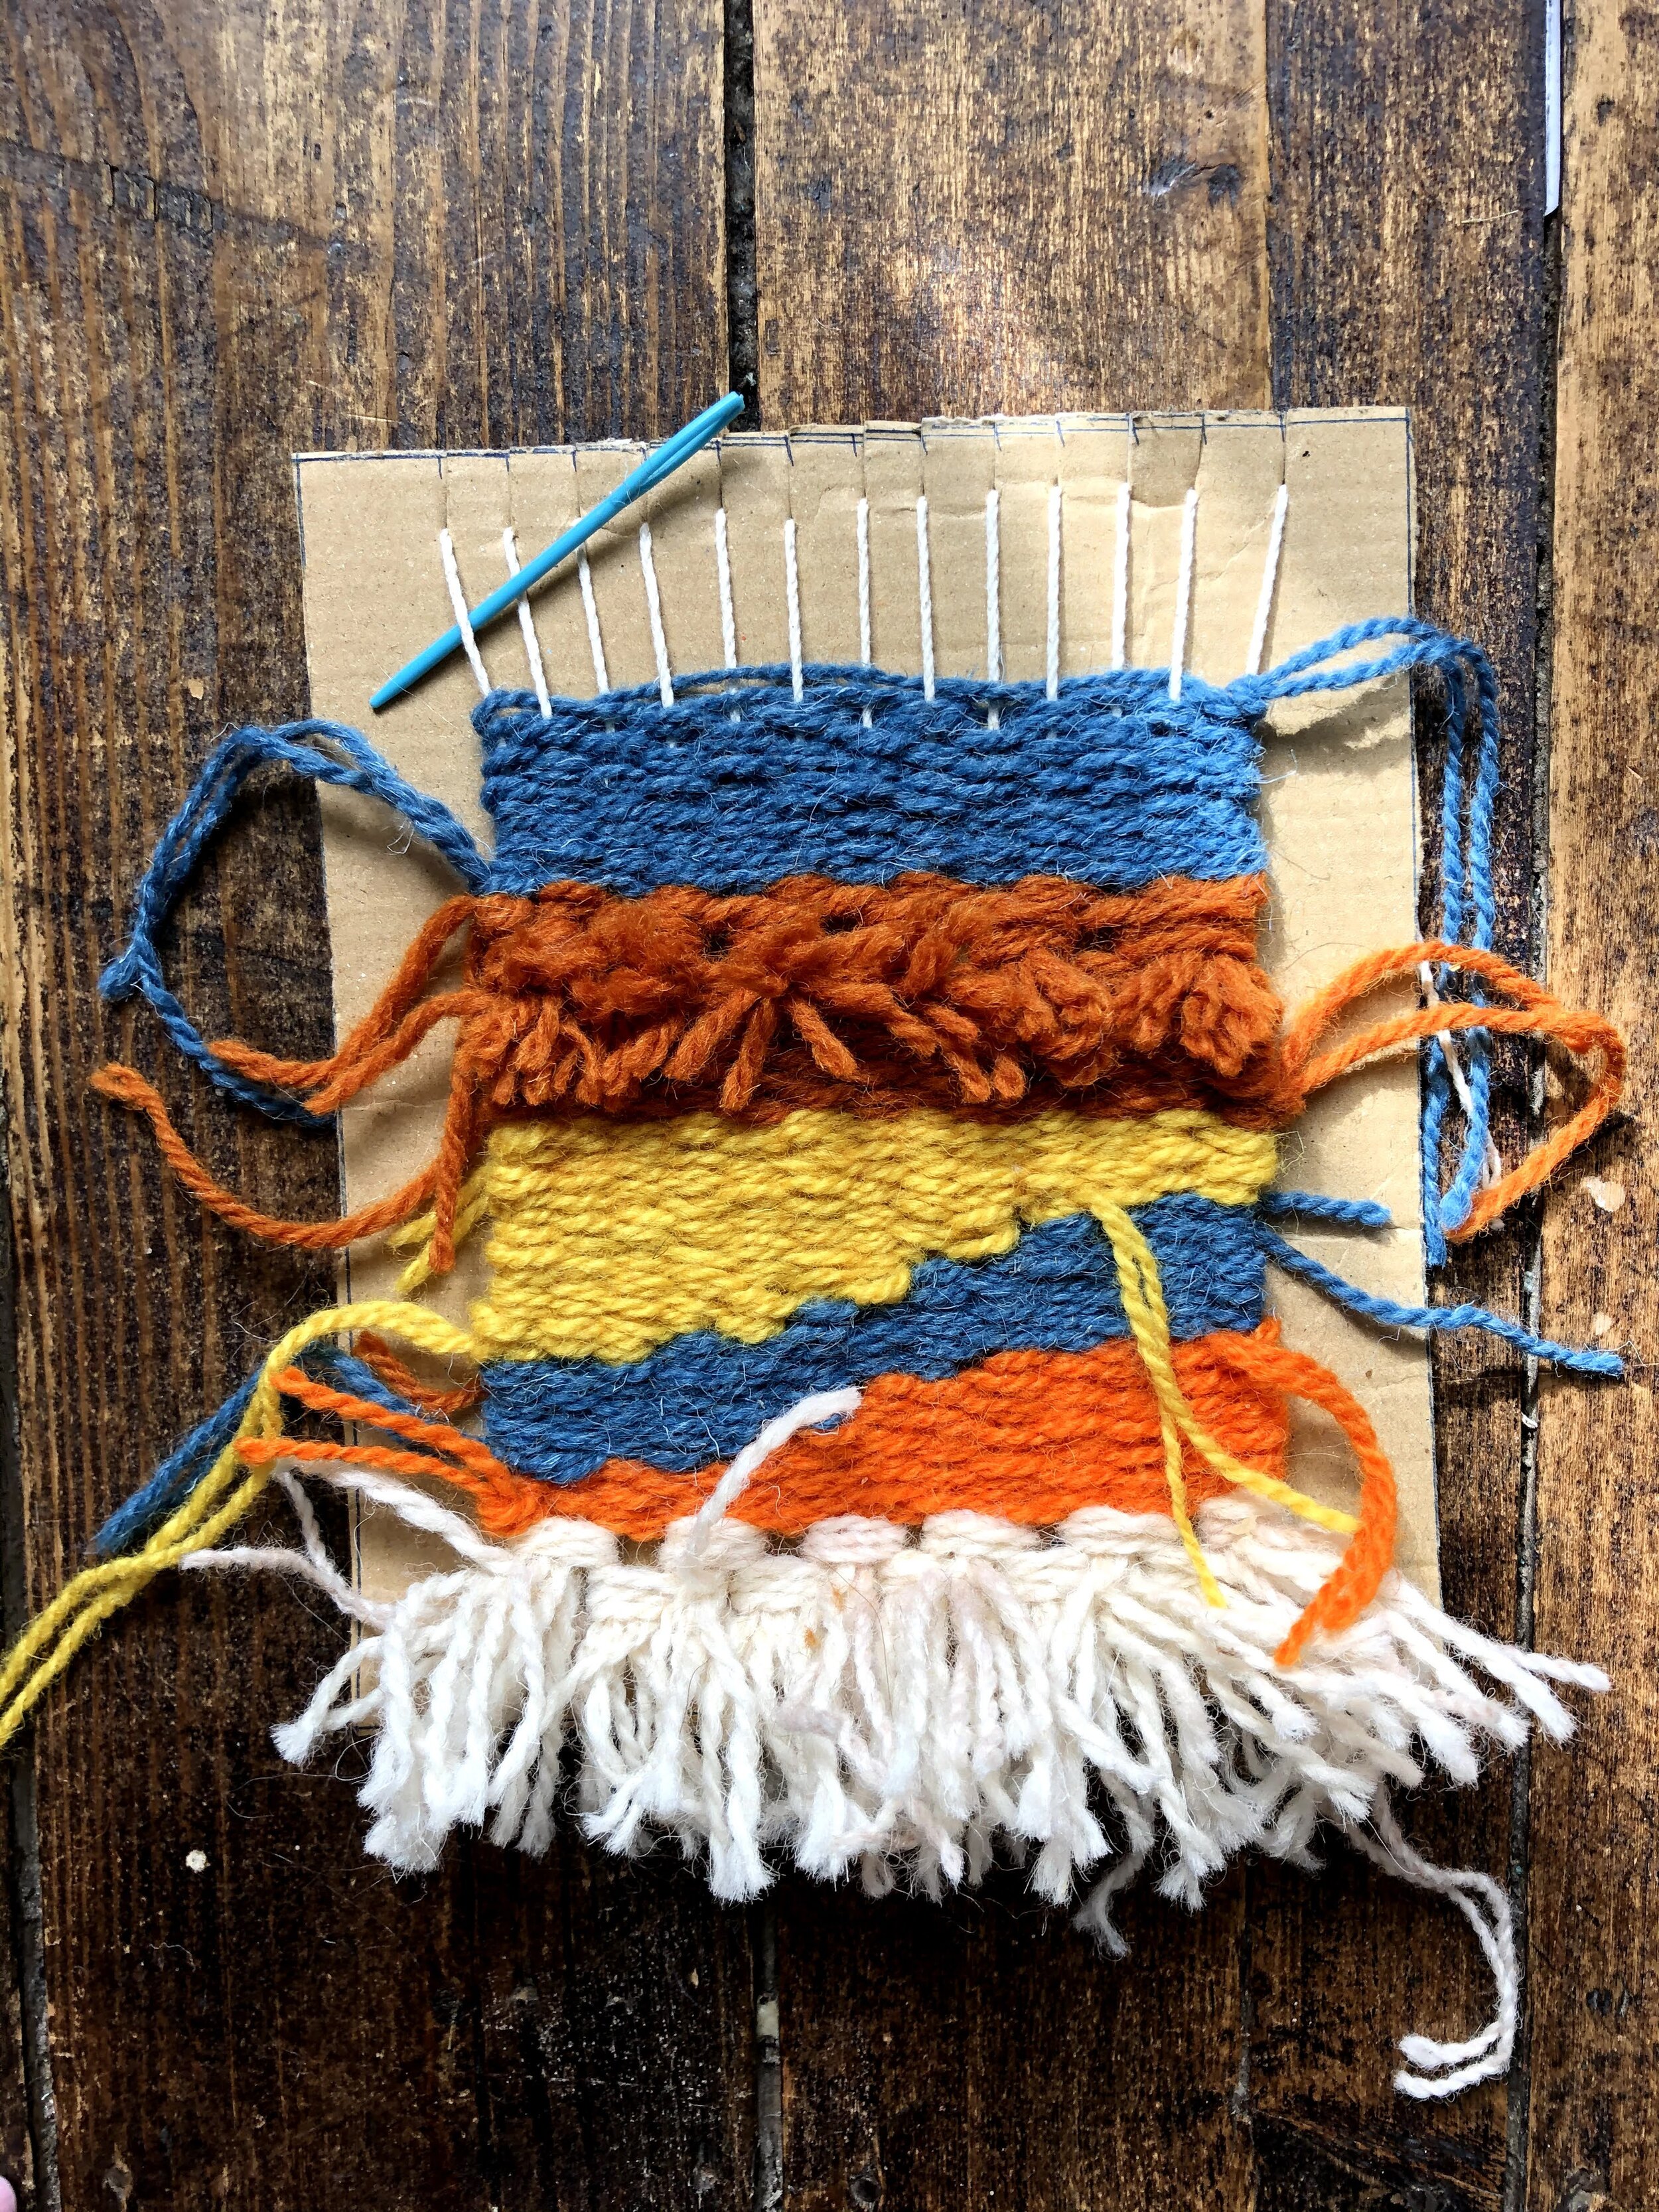 How to teach children to tapestry weave — Abigail Wastie